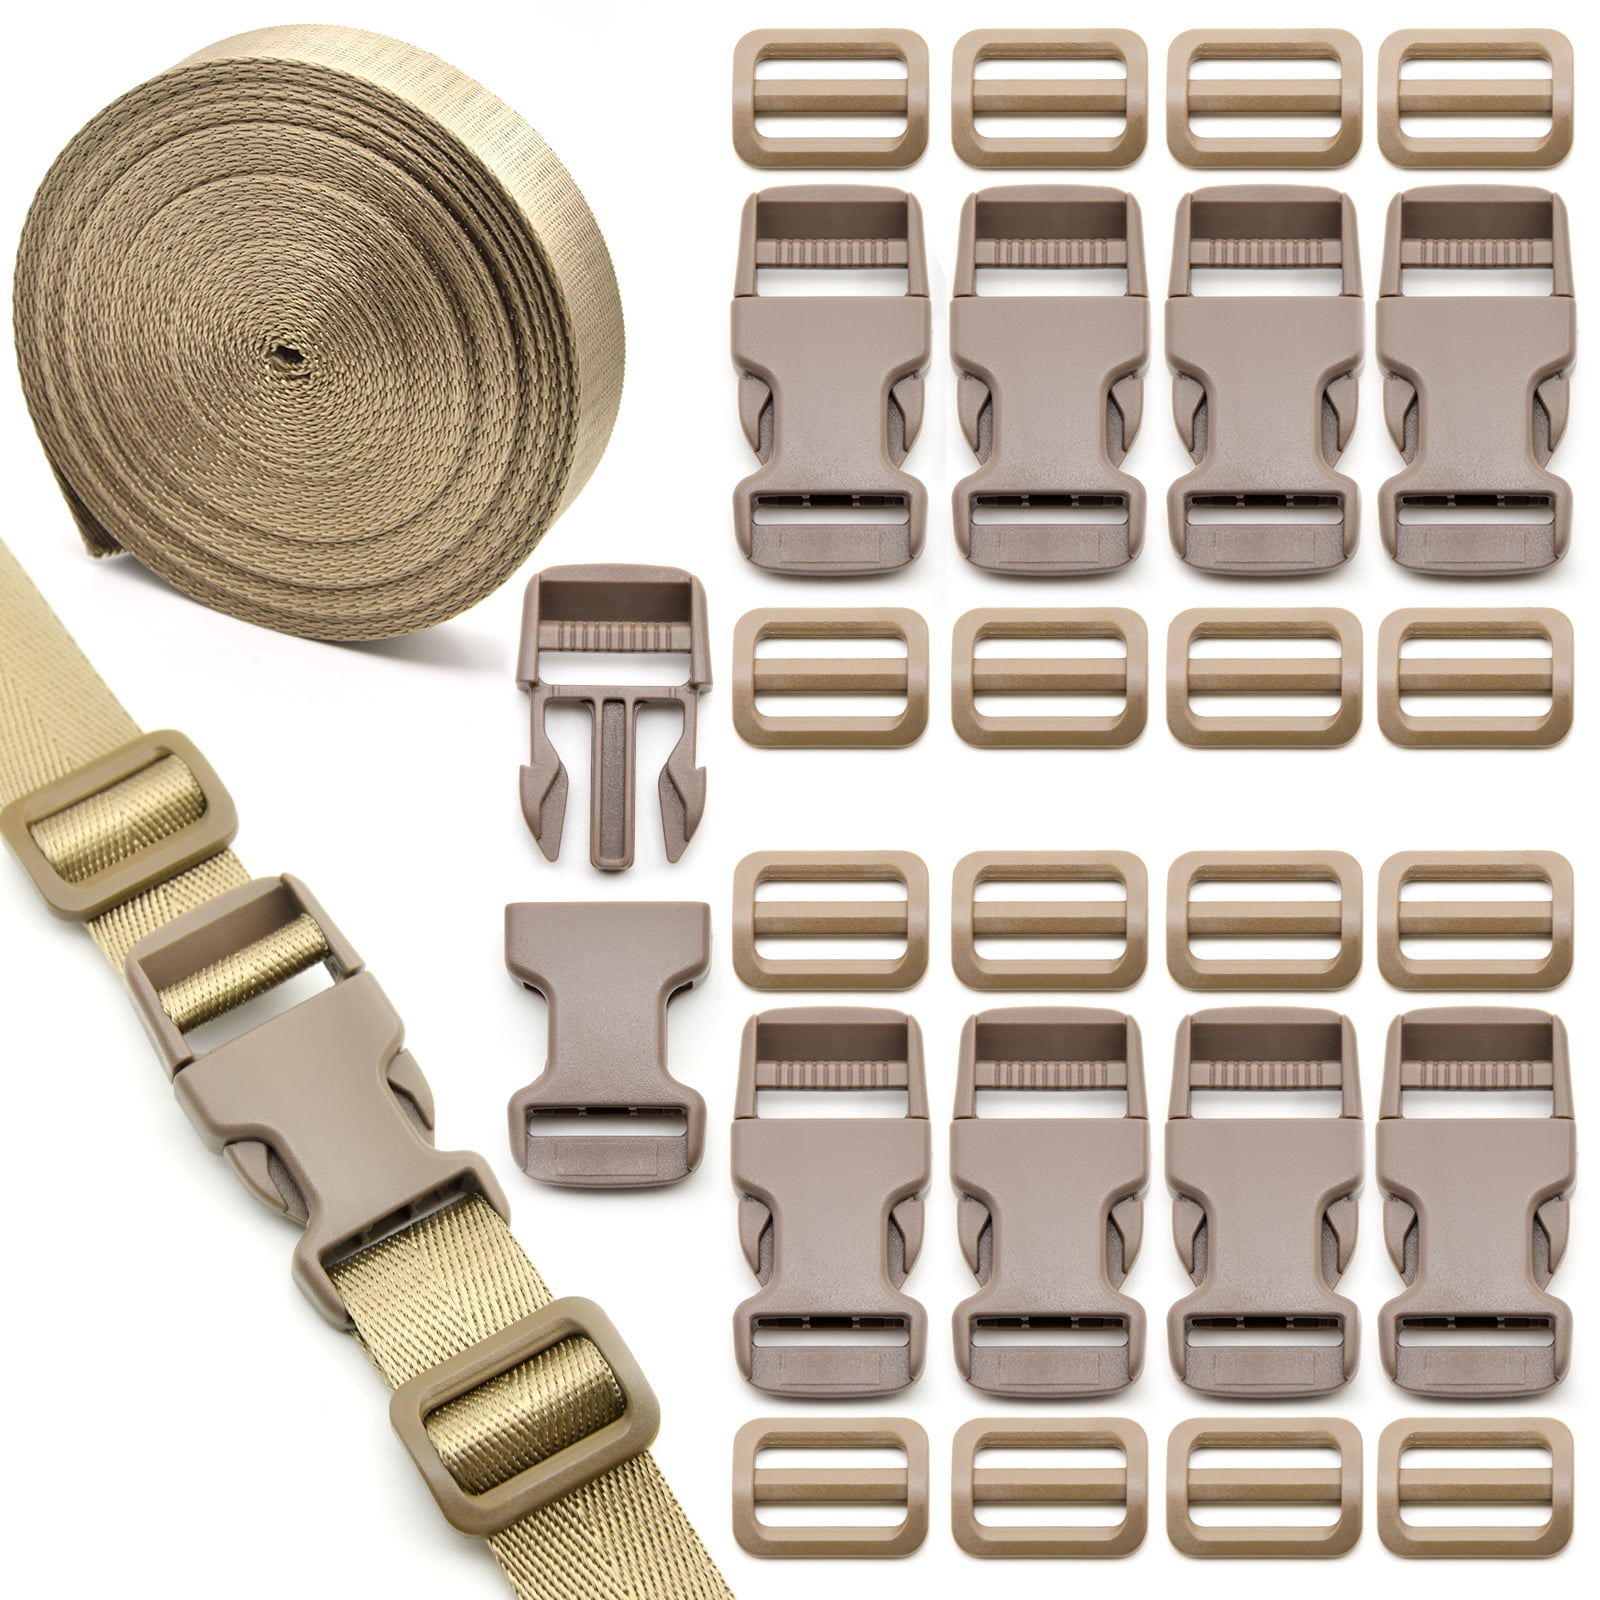 1 Inch 11 Yards Nylon Webbing Strap With 10PC Plastic Buckle +